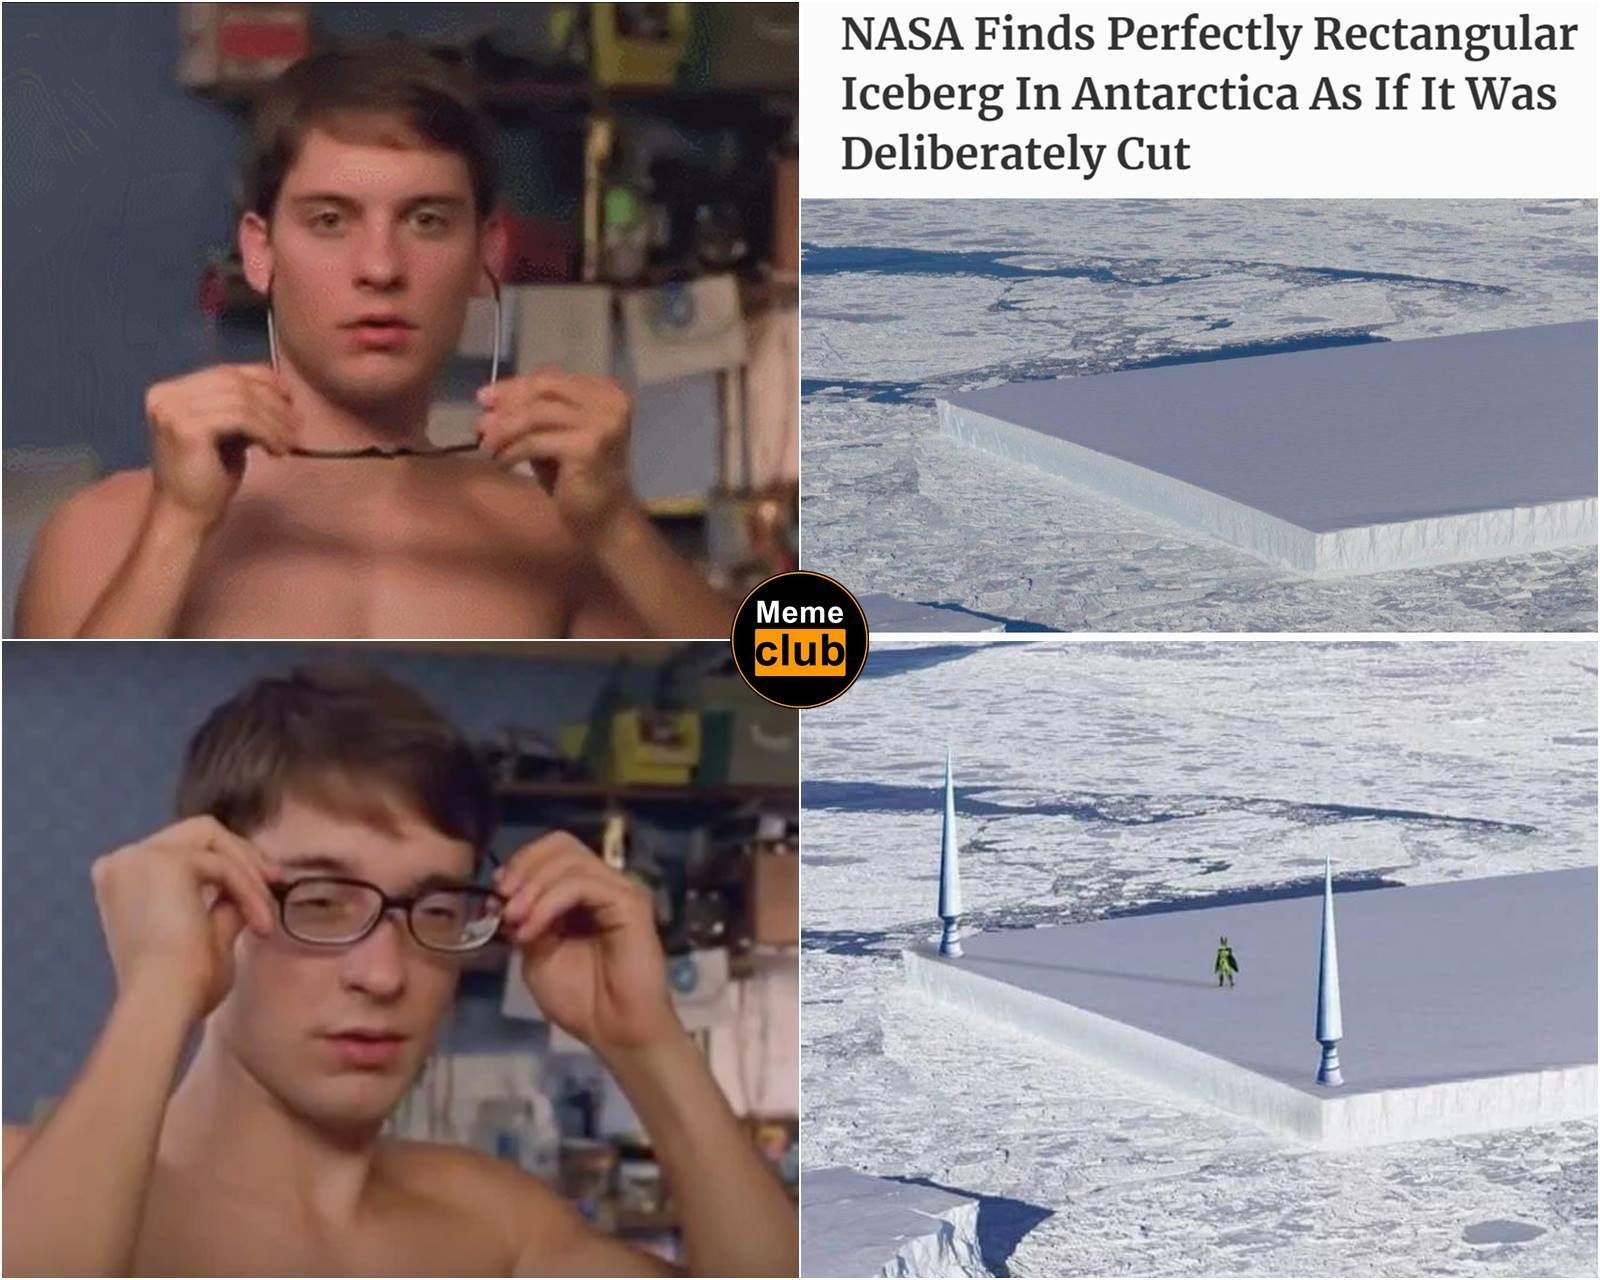 Meme - Nasa Finds Perfectly Rectangular Iceberg In Antarctica As If It Was Deliberately Cut Meme club